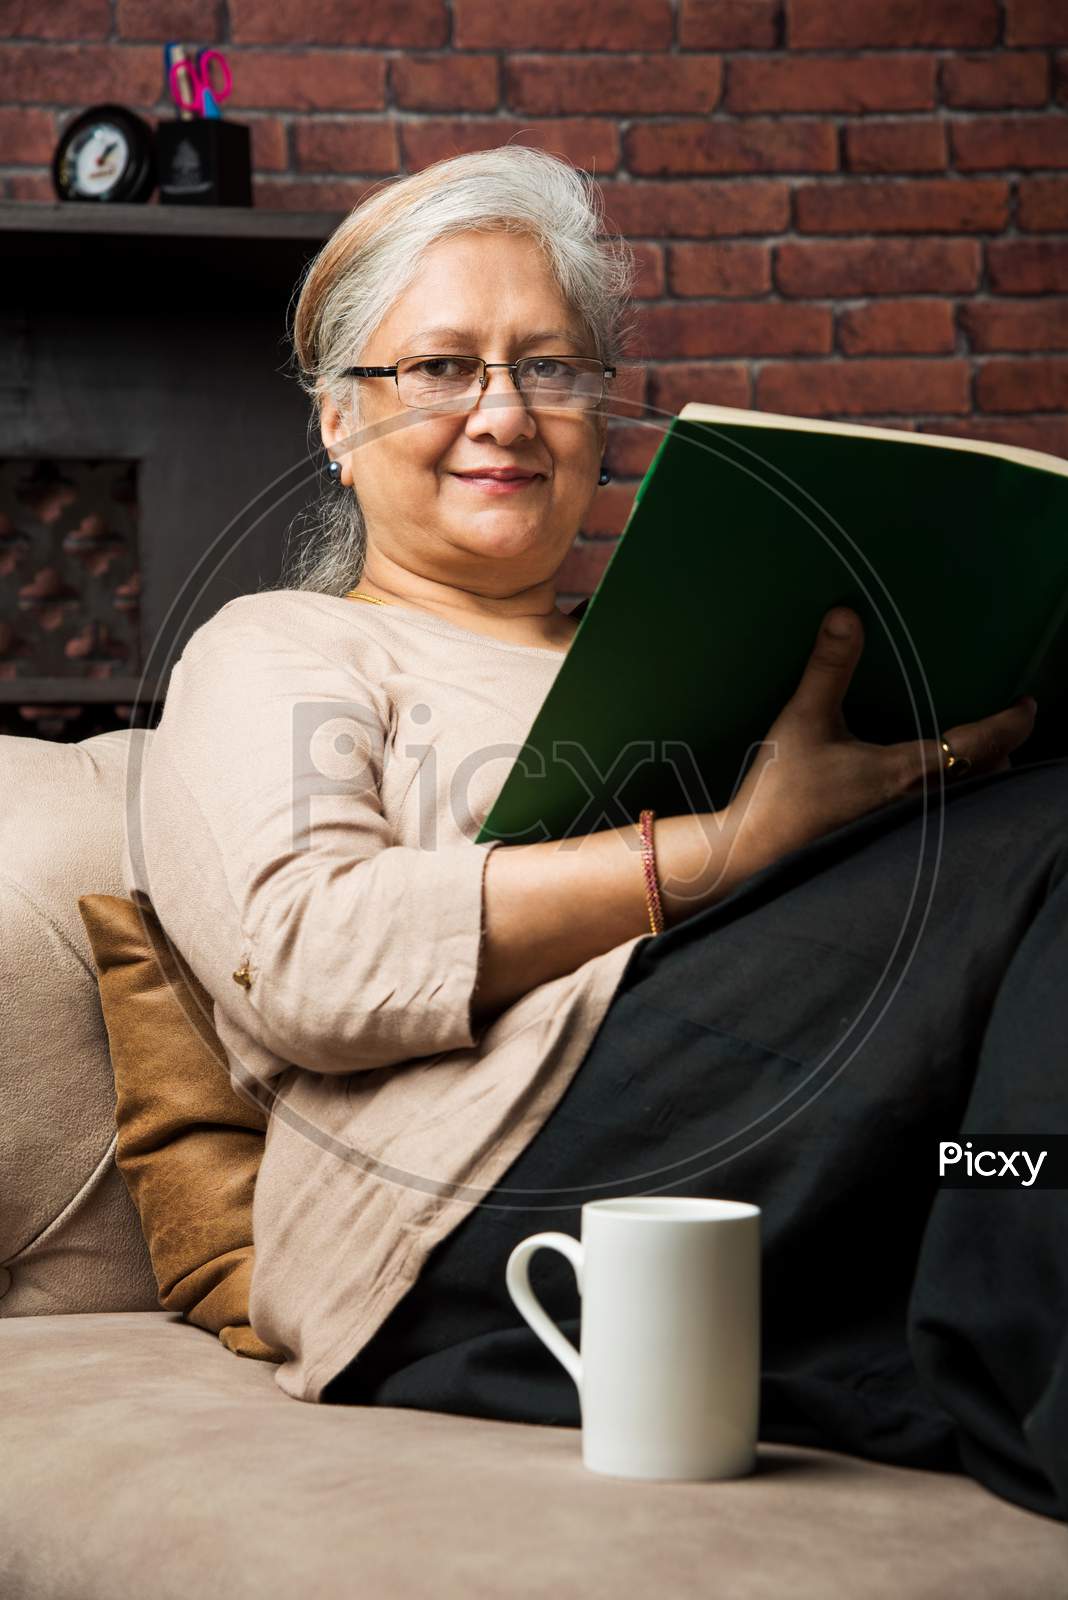 cute Senior indian/asian lady sitting on recliners chair or sofa reading book or using tab or laptop computer